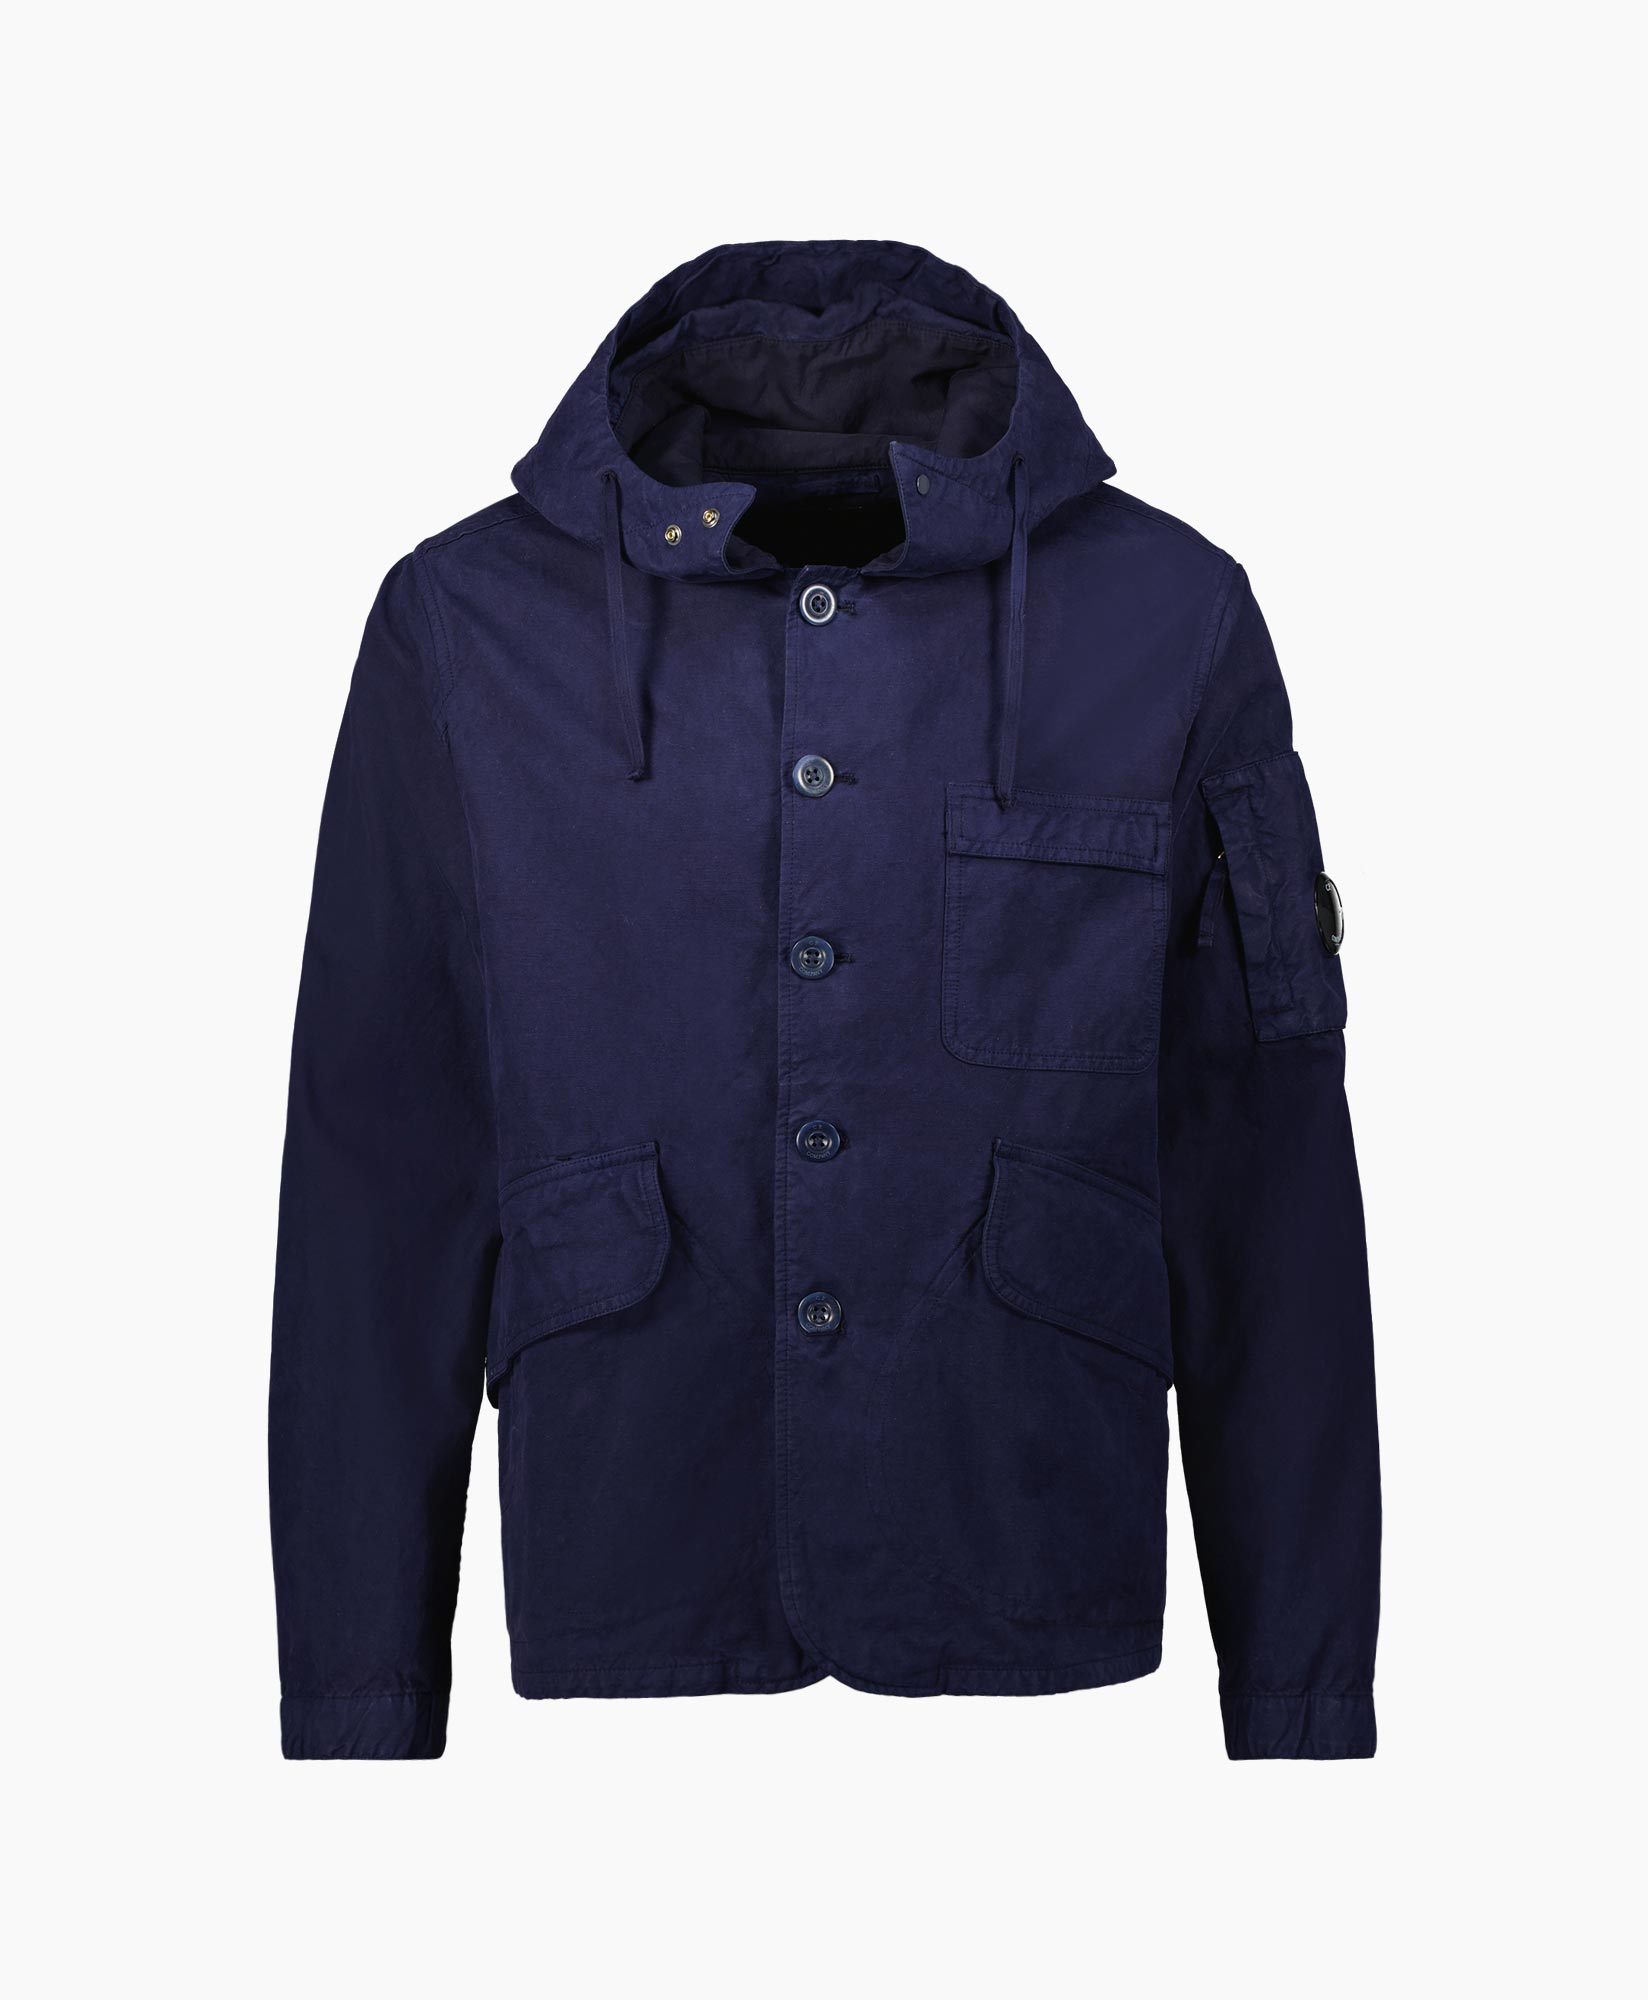 Cp Company Jack 14cmow246a-006354 Donker Blauw